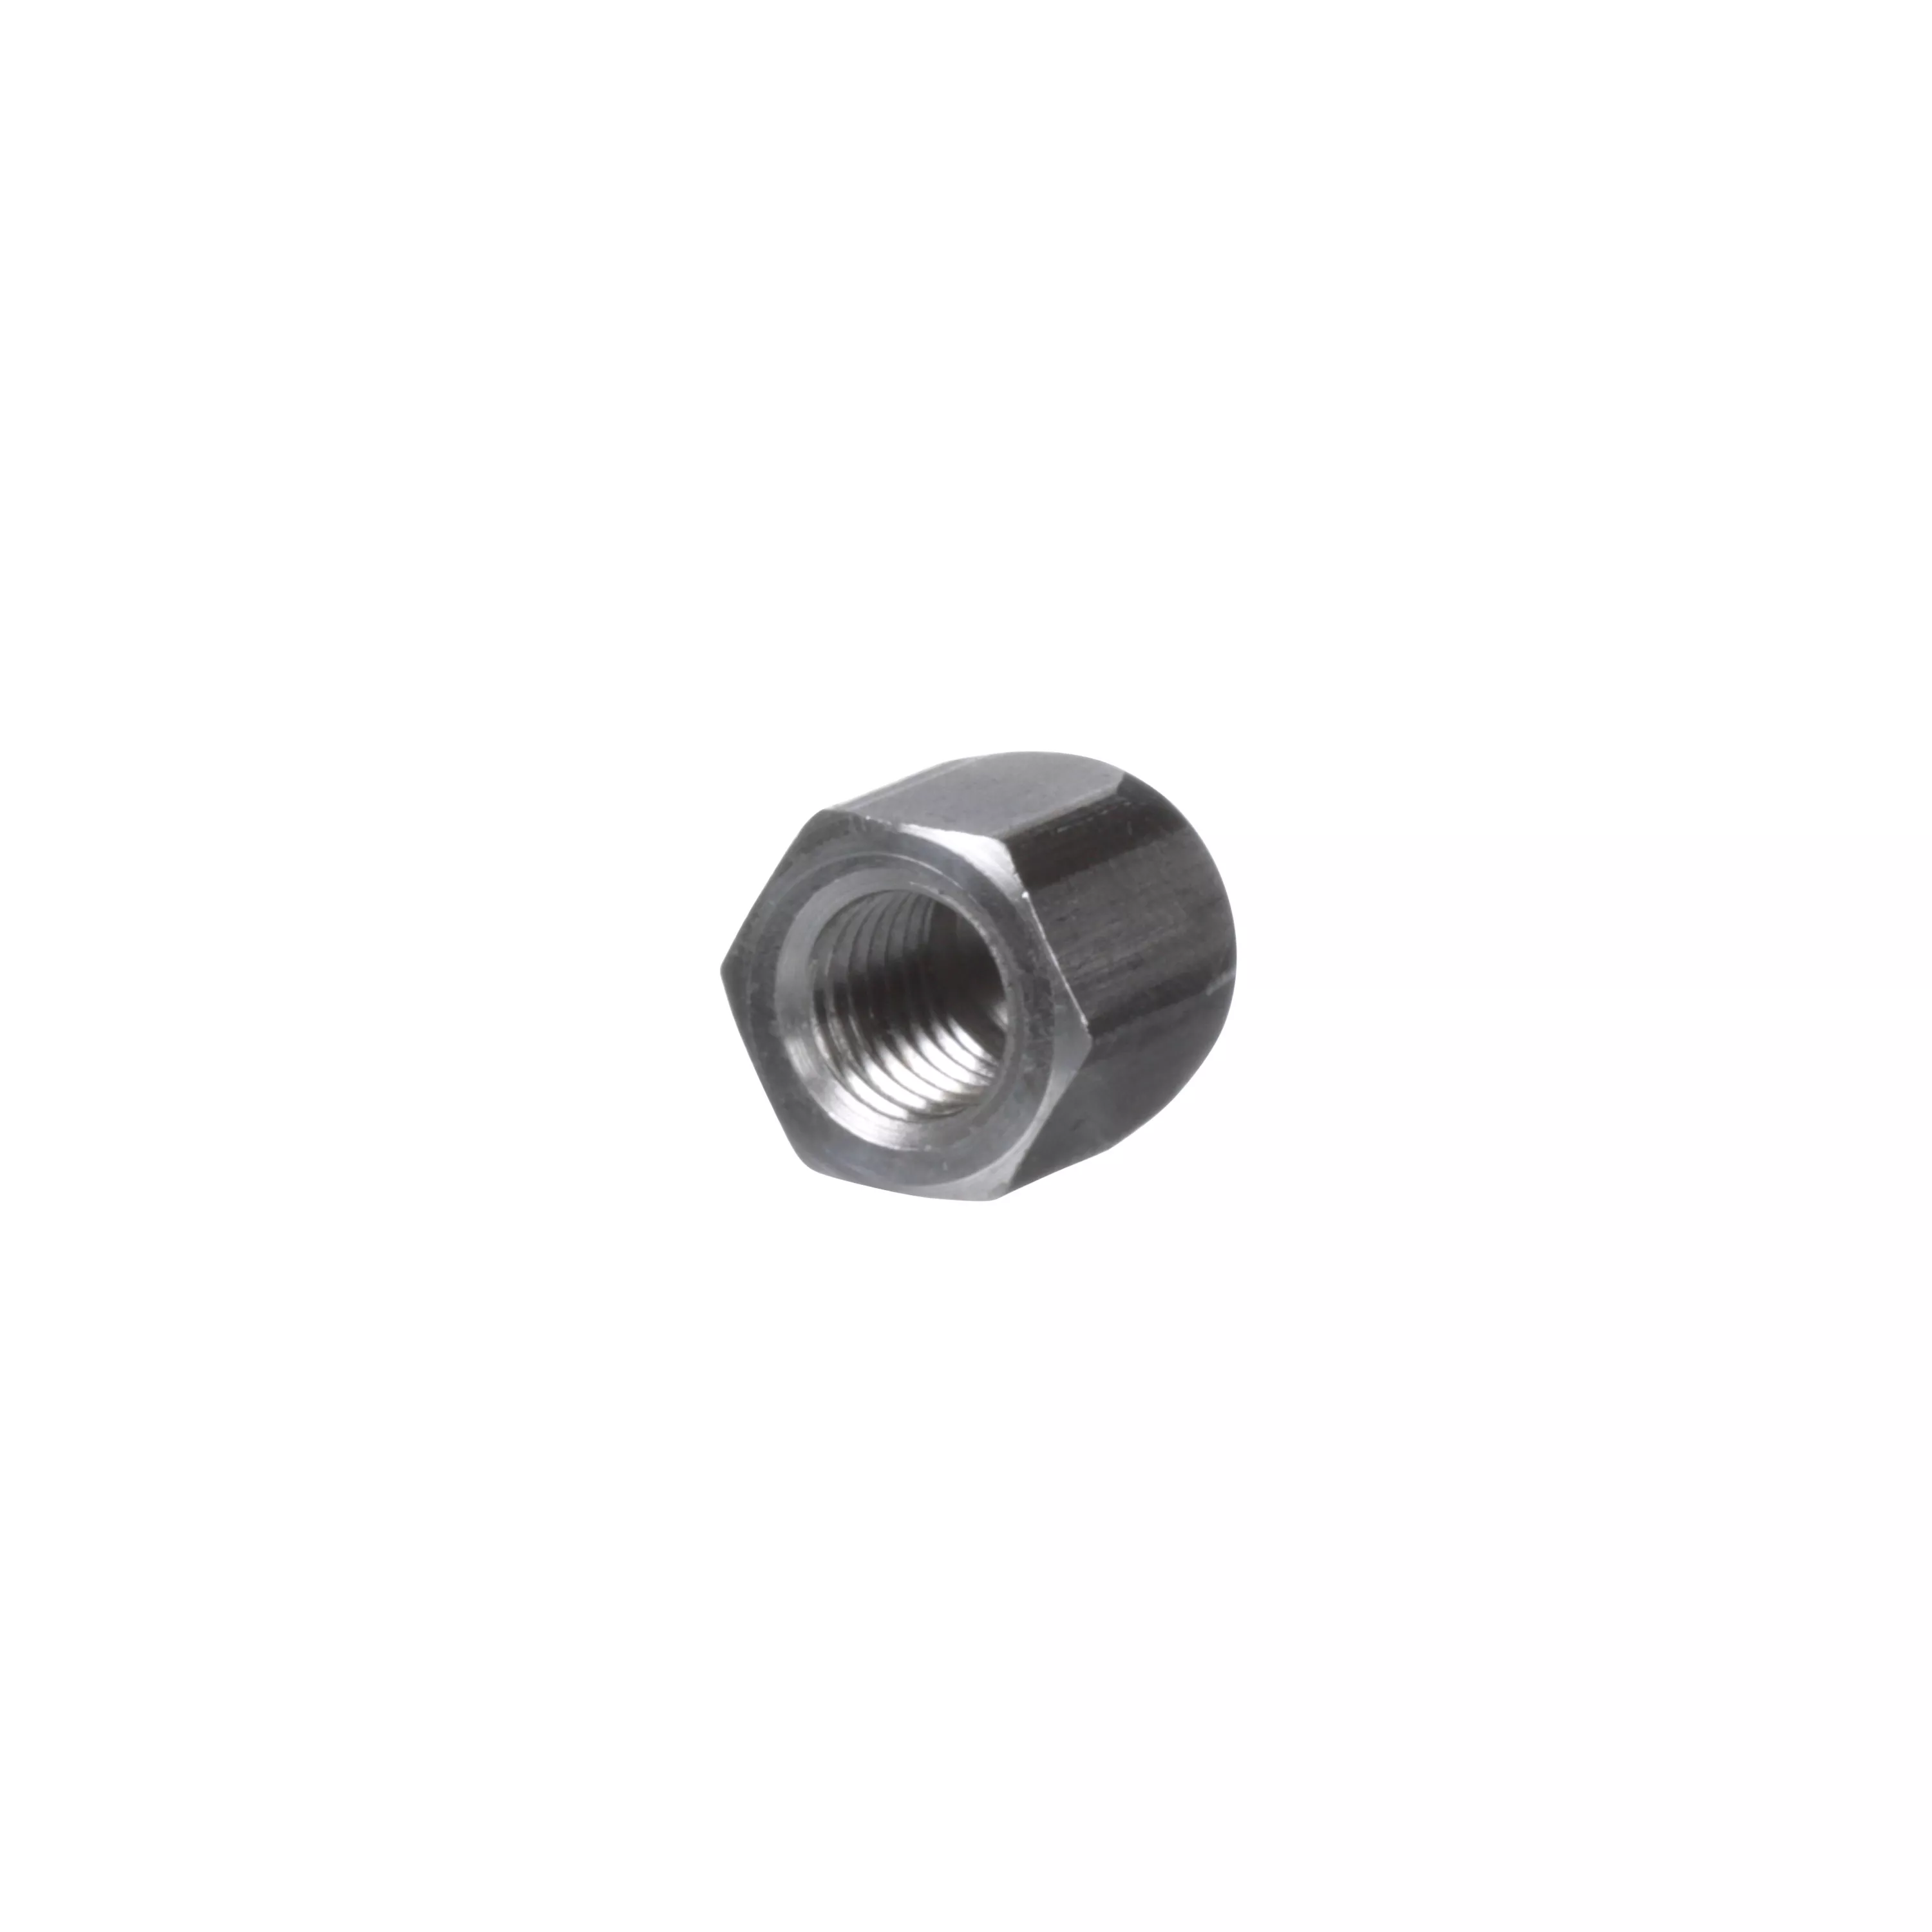 Product Number PARTS | 3M™ Scotch-Weld™ PUR Applicator Tip Cap